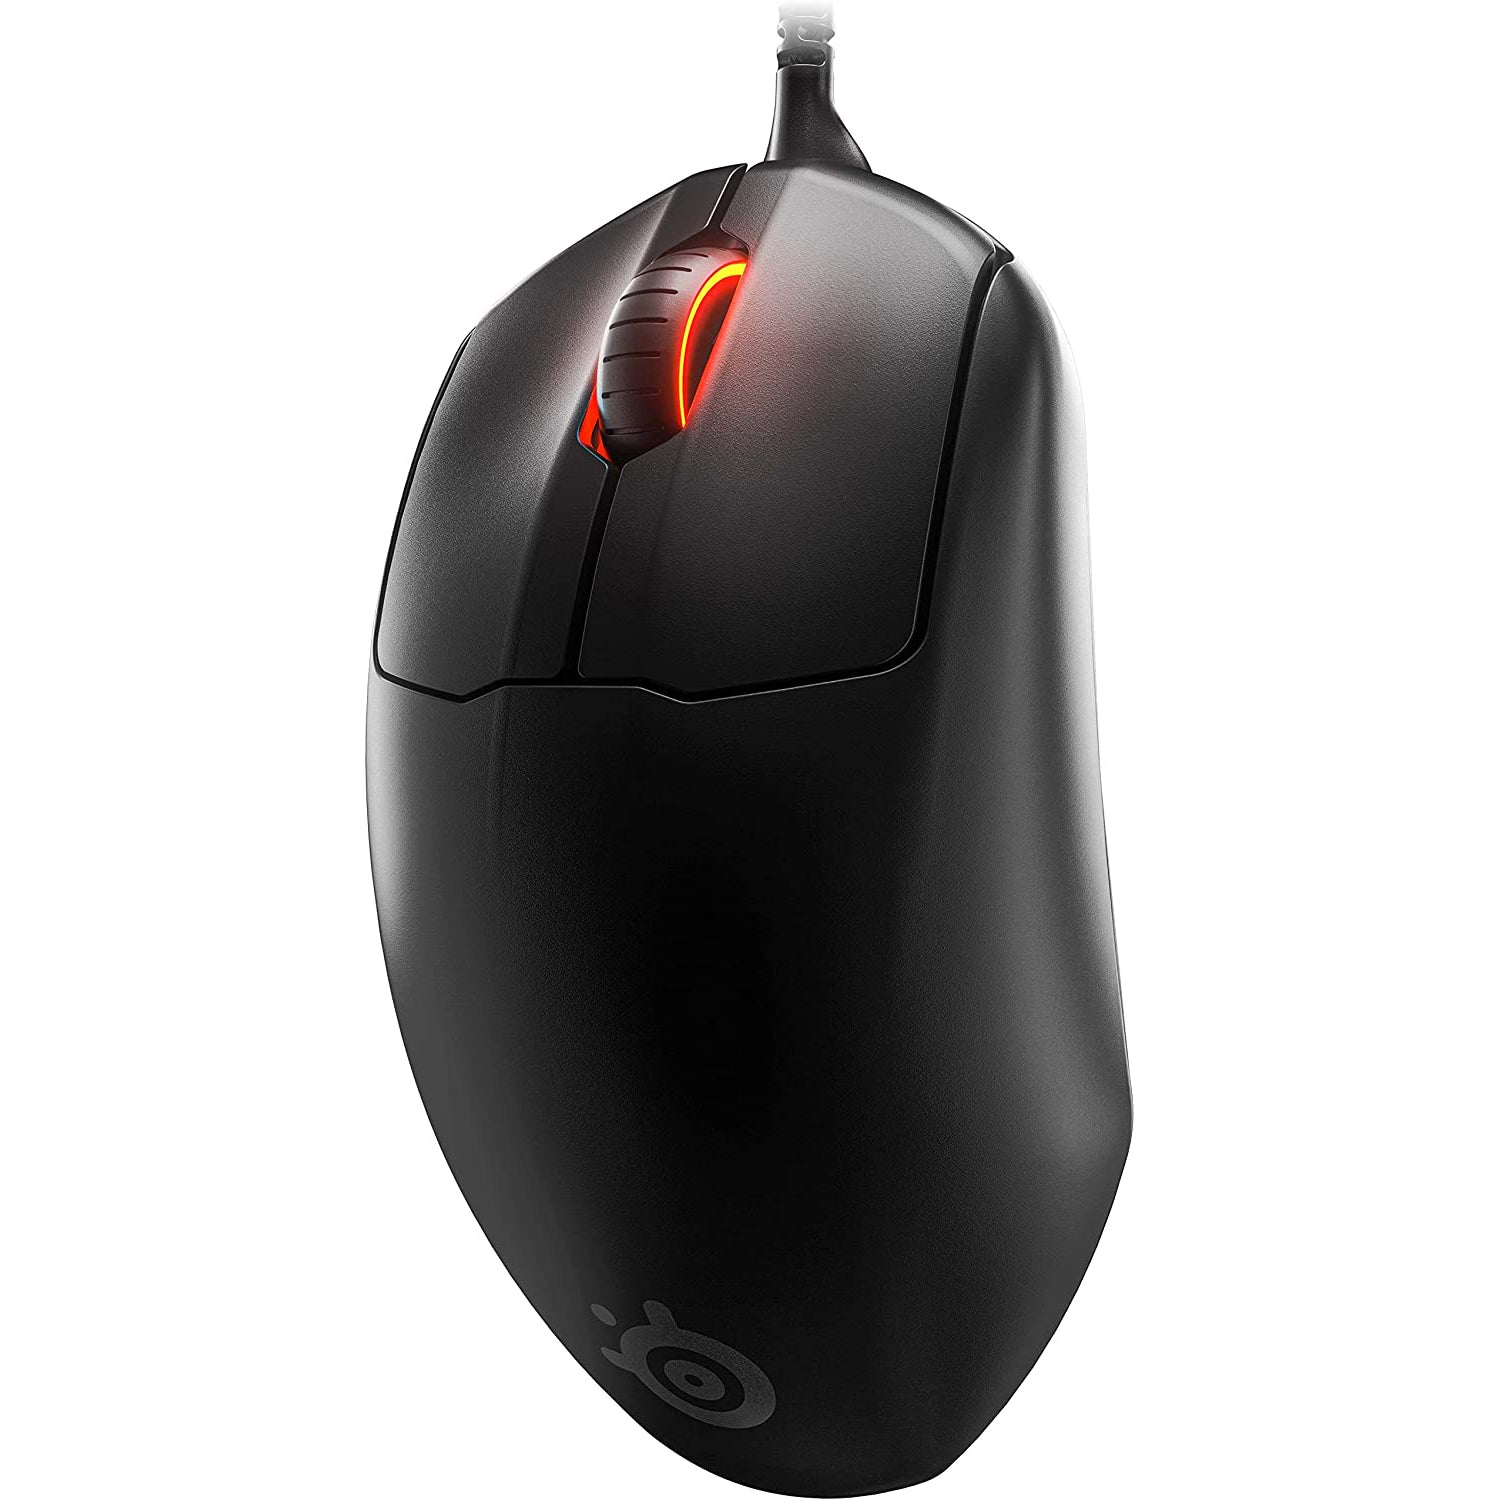 SteelSeries PRIME+ Wired Optical Gaming Mouse - Black